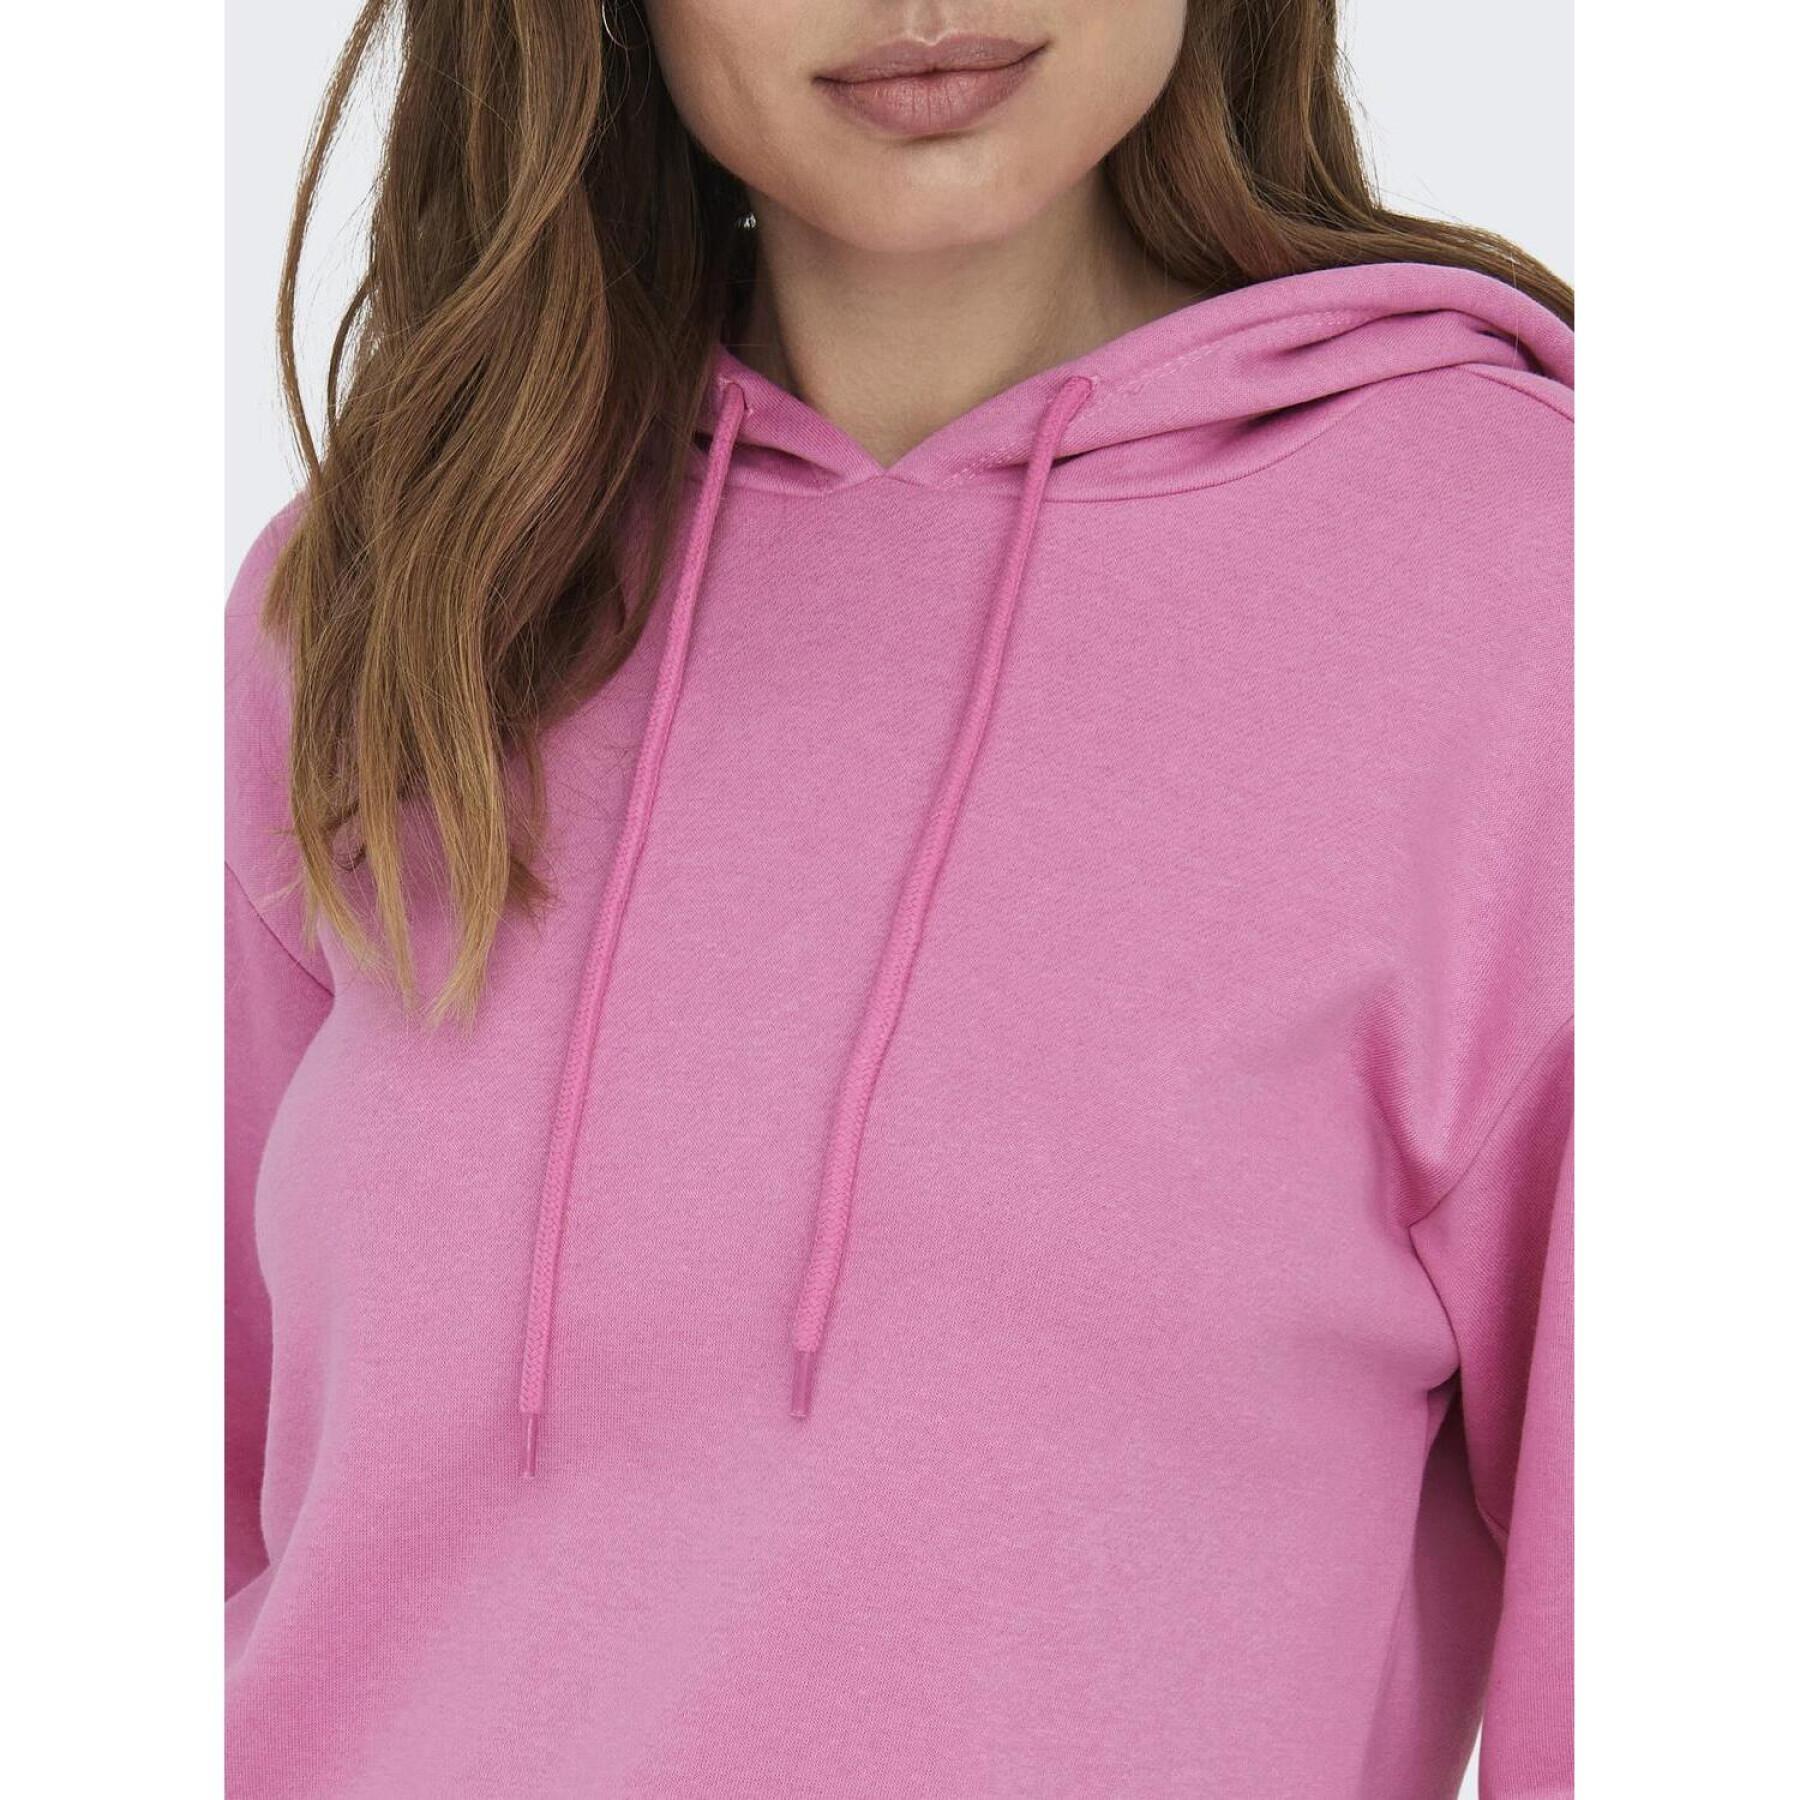 Dames Hoodie Only Fave